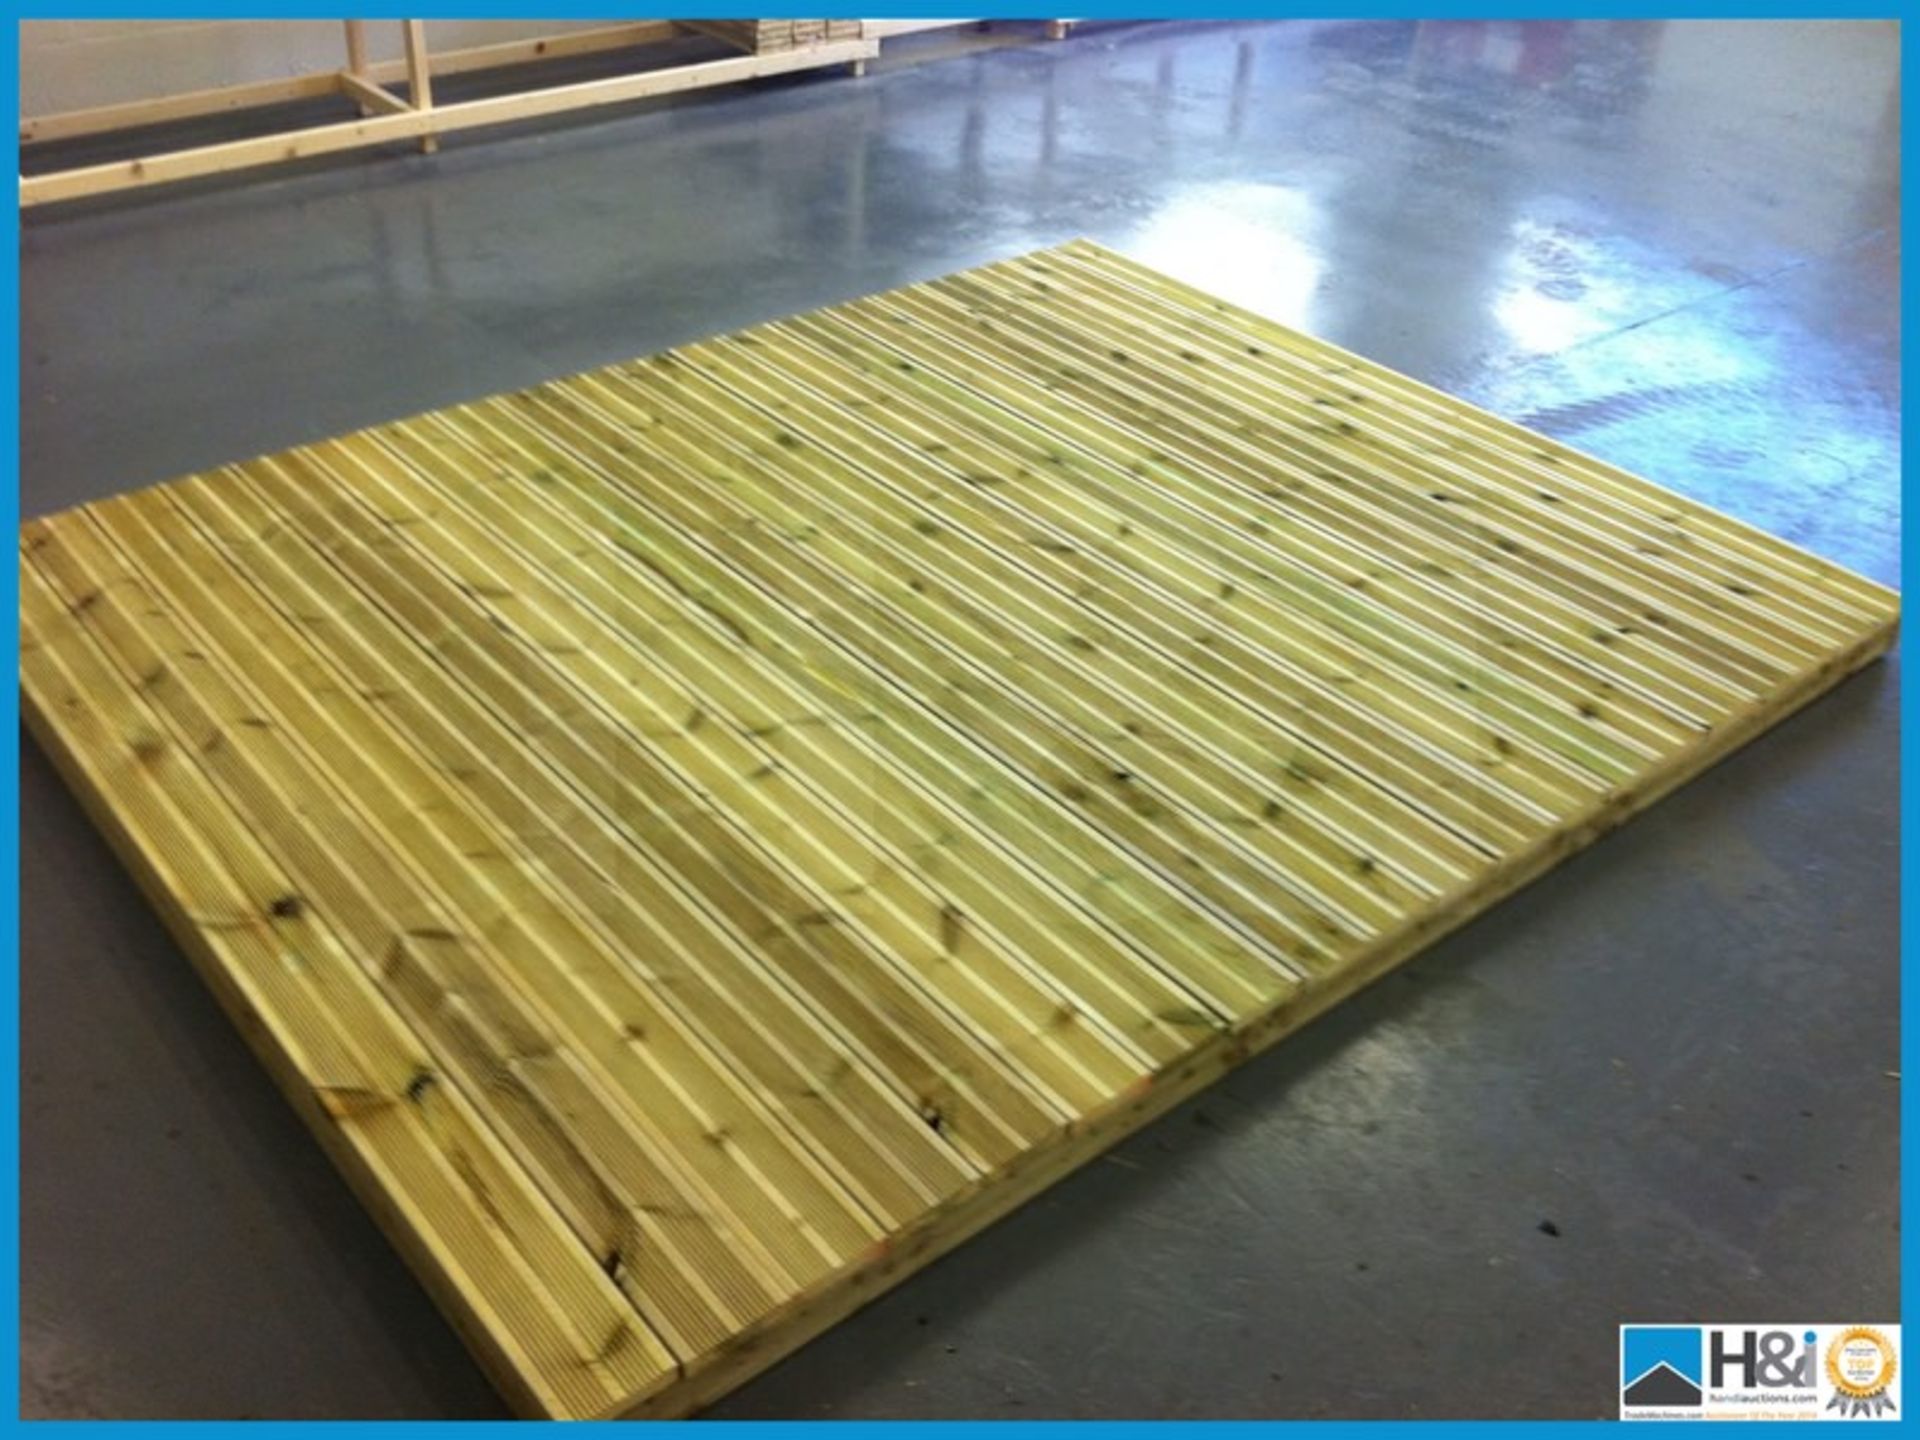 Tanalised 3.0 x 3.0 Heavy Duty Decking Kit. All 32x125 decking cut to length with side fascia's - Image 5 of 12